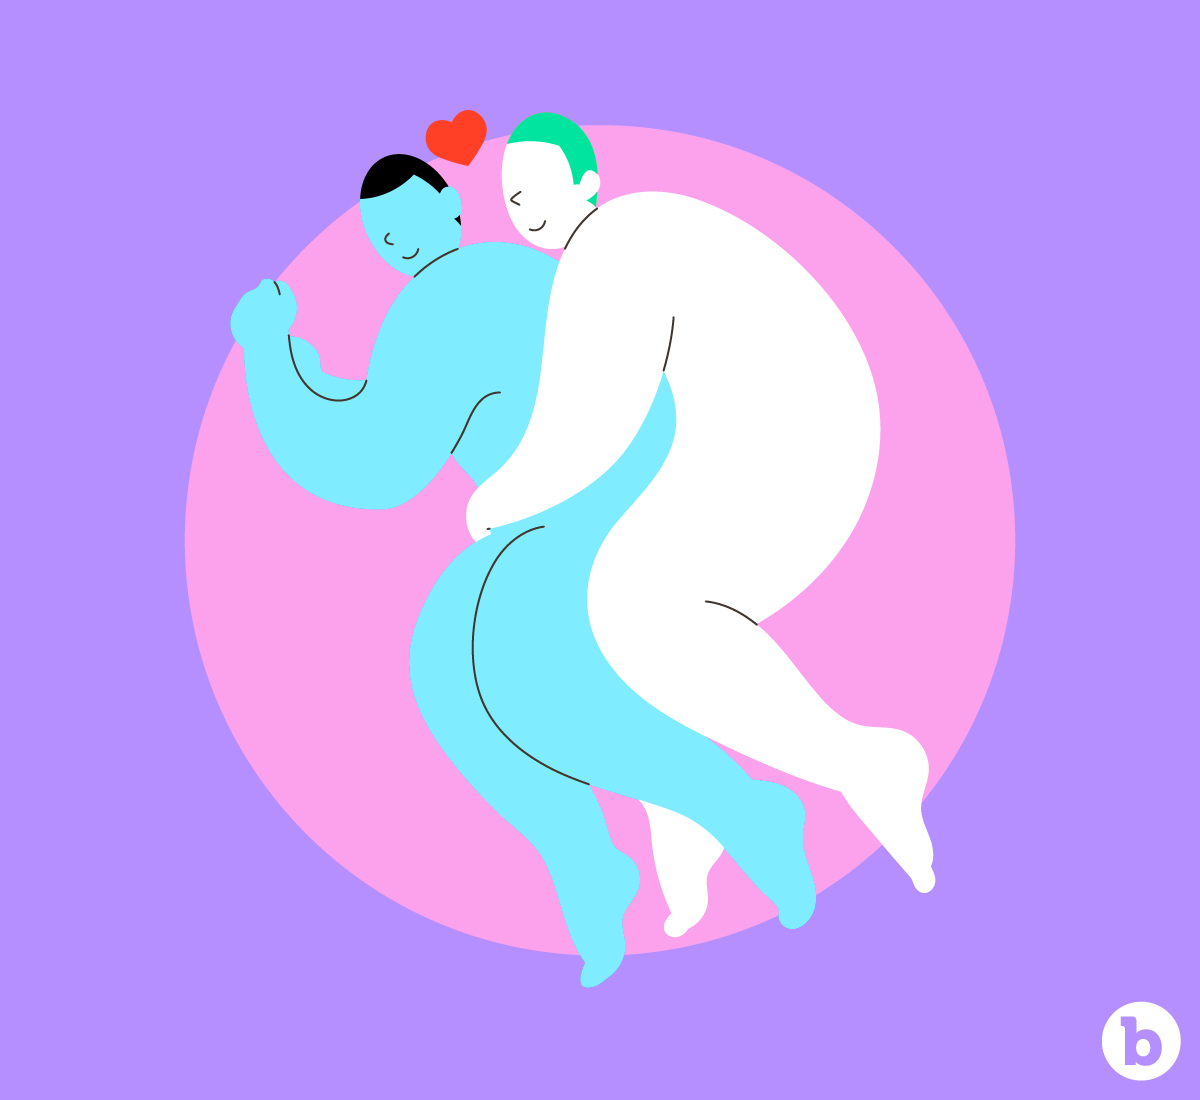 Orgasms aren't the key goal when it comes to comfort sex